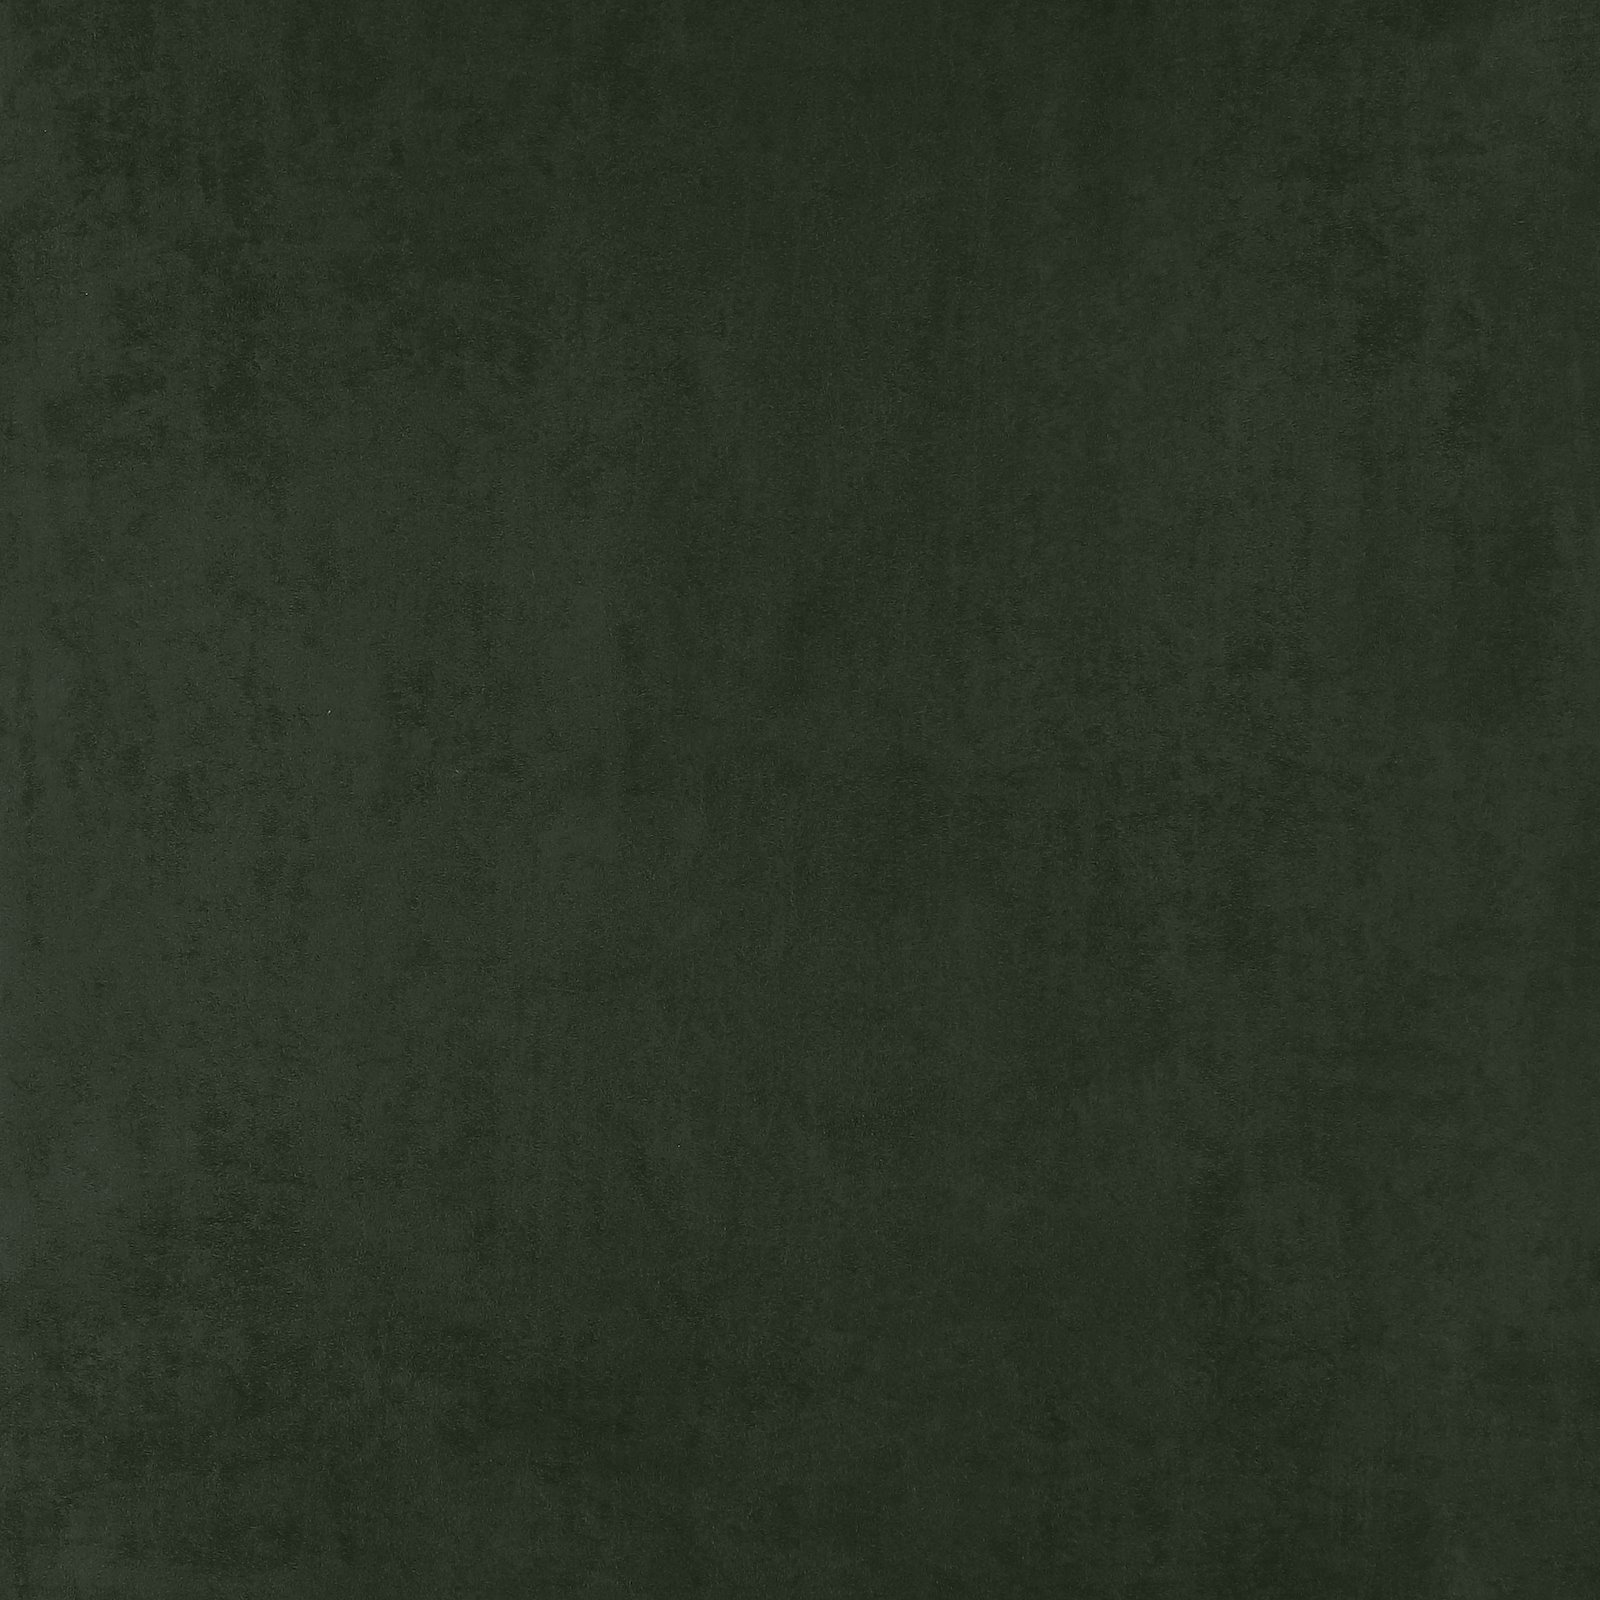 Upholstery fake suede dark bottle green 823761_pack_solid